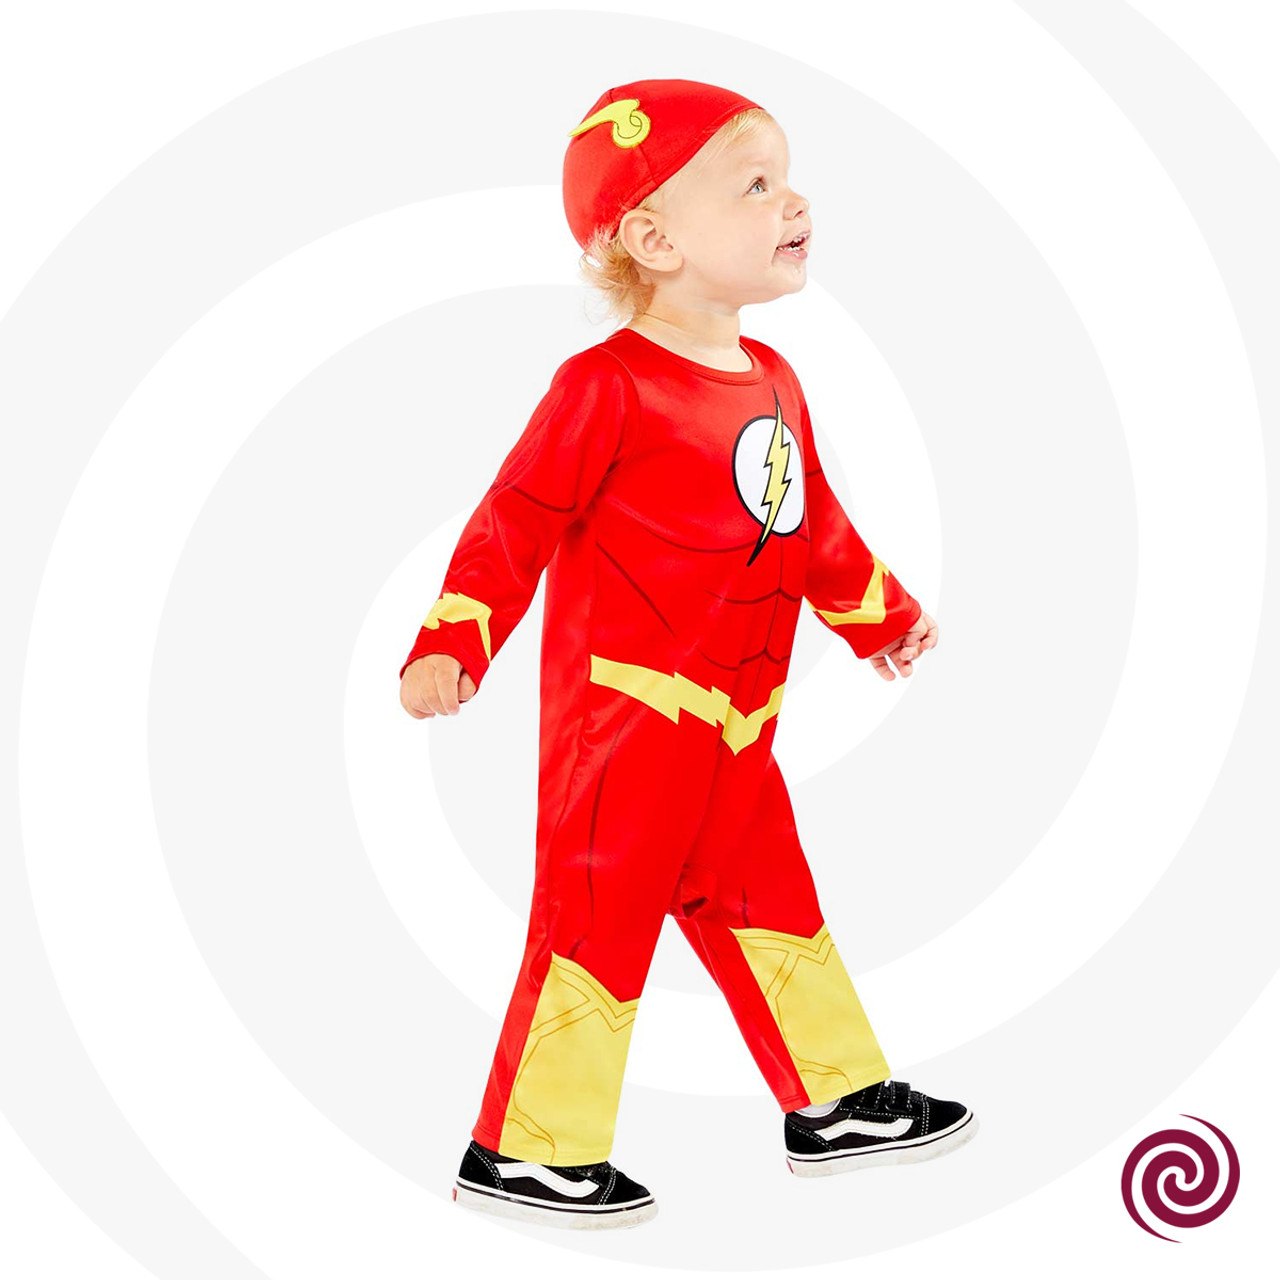 https://cdn11.bigcommerce.com/s-avymfin2rr/images/stencil/1280x1280/products/238/510/238-costume-flash-baby-dx-amfb__13635.1681396559.jpg?c=1